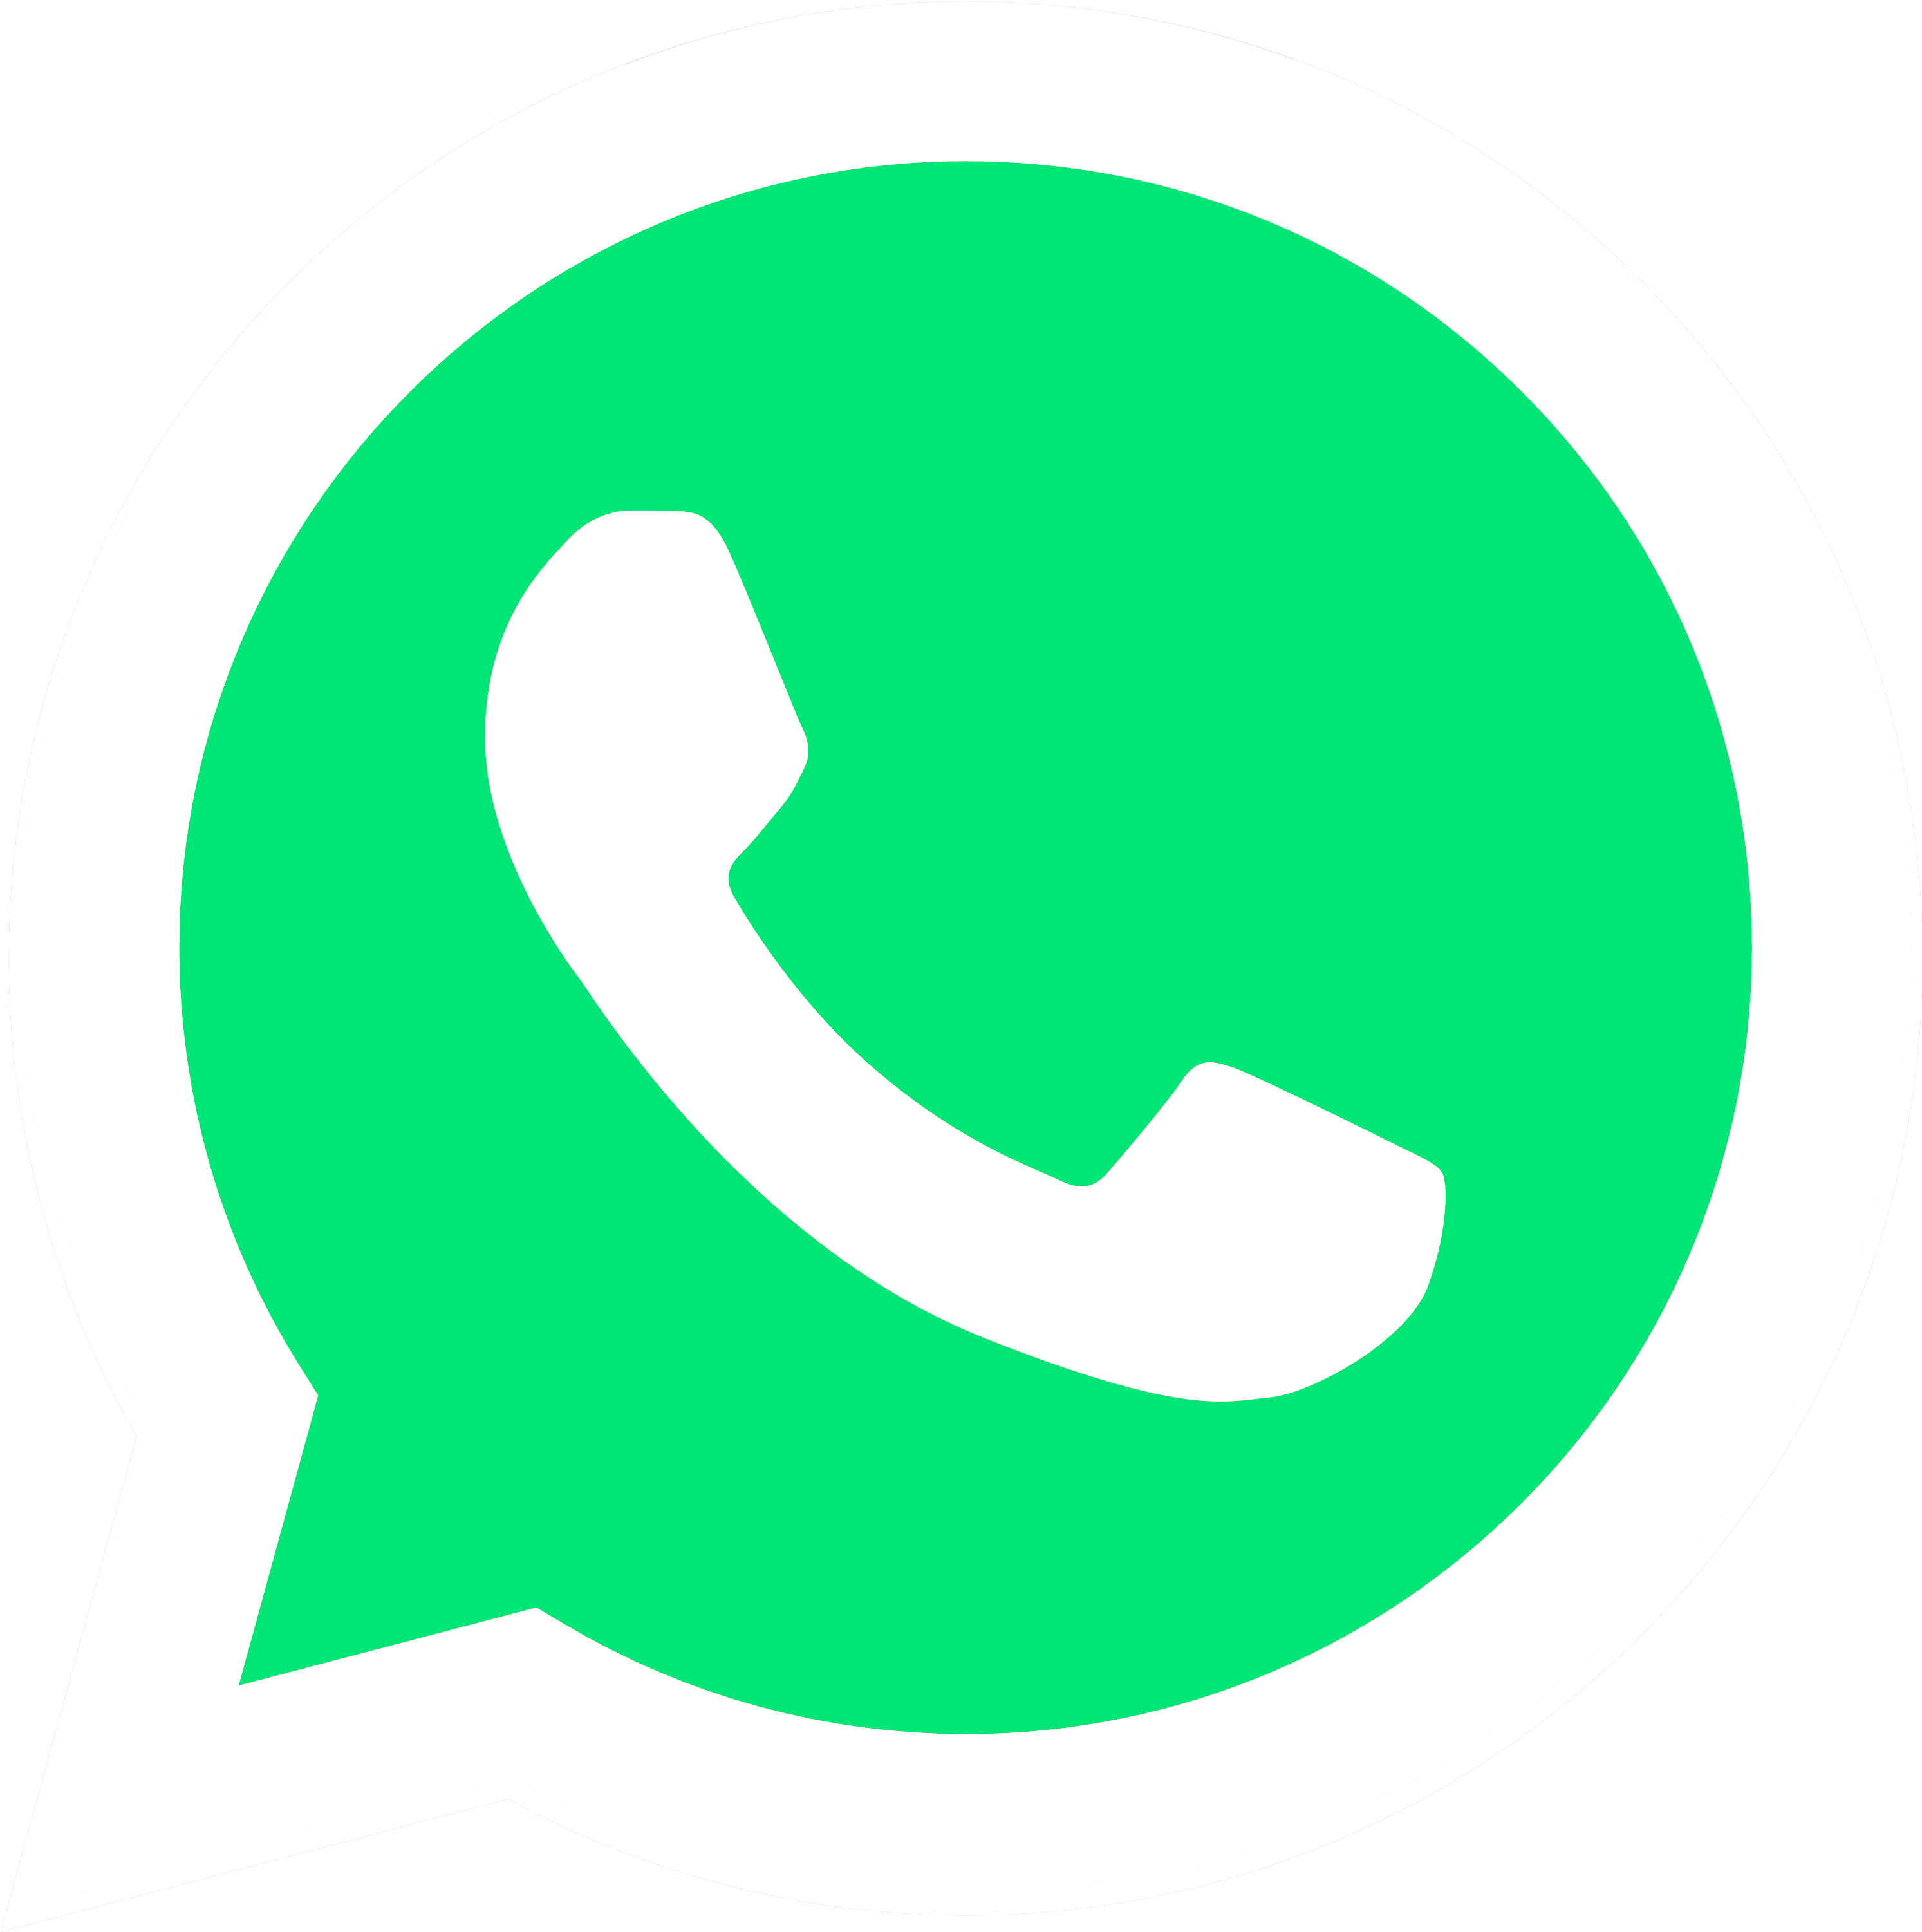 Here You Can Find Out The Best WhatsApp Chrome Extensions and Apps - Cashify